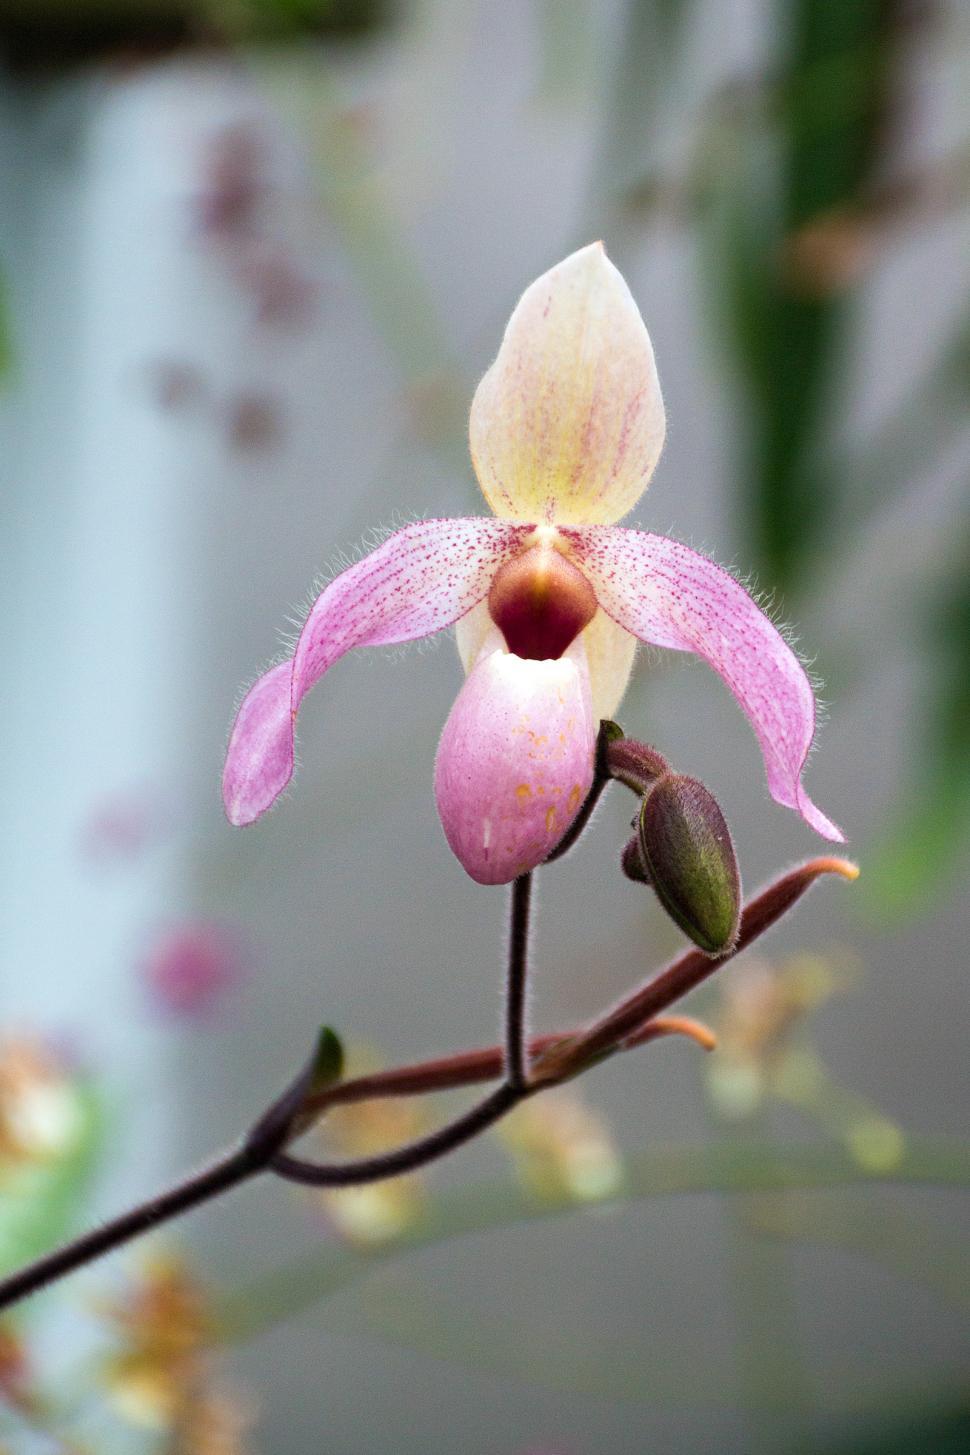 Free Image of Paphiopedilum Orchid with Pink Flower in Greenhouse 